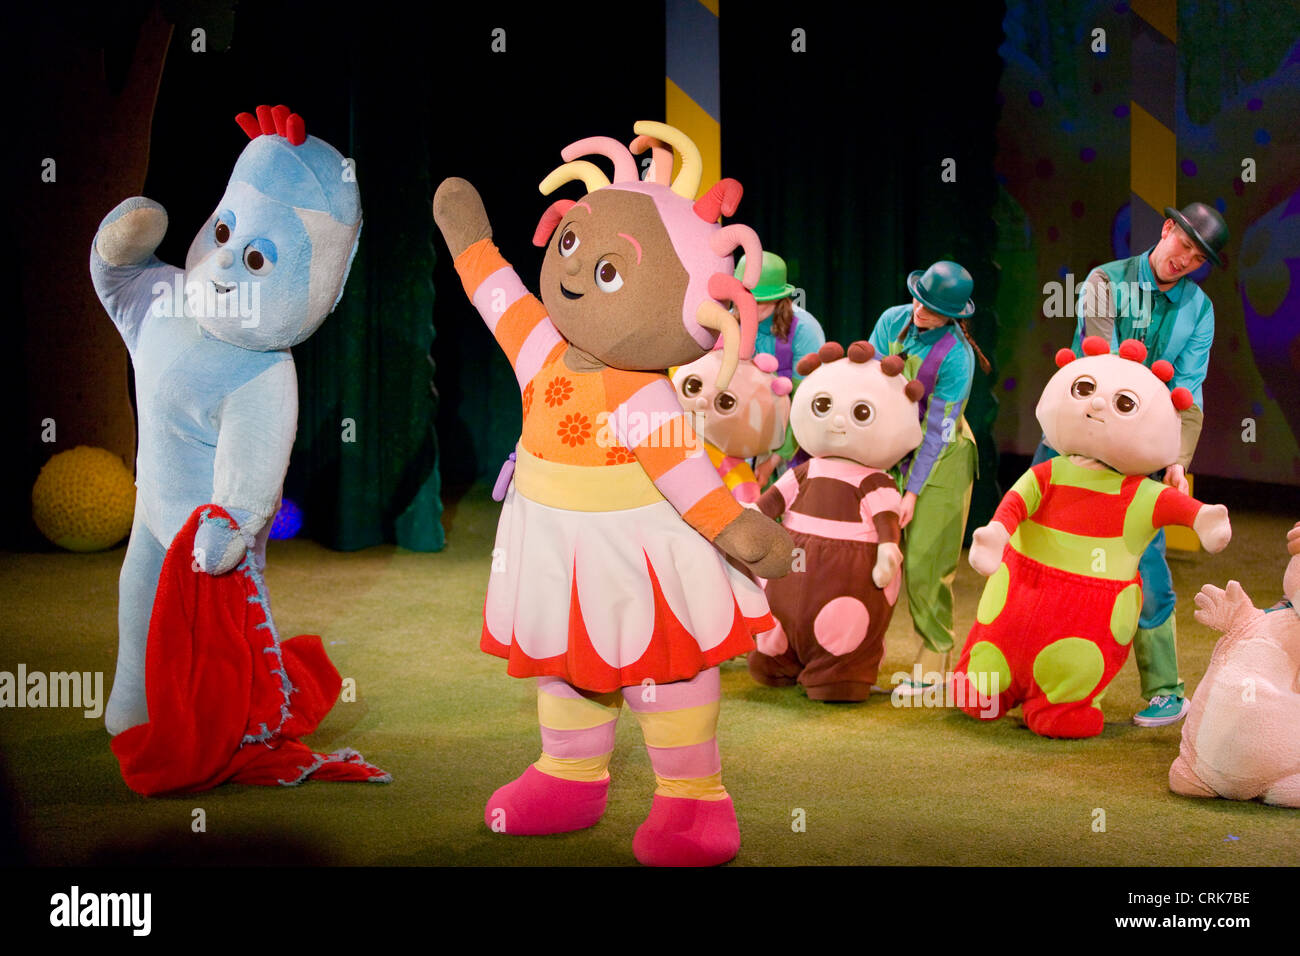 Upsy Daisy and Iggle Piggle and the tombliboos/  tombliboo: In The Night Garden character / characters. UK. Stock Photo